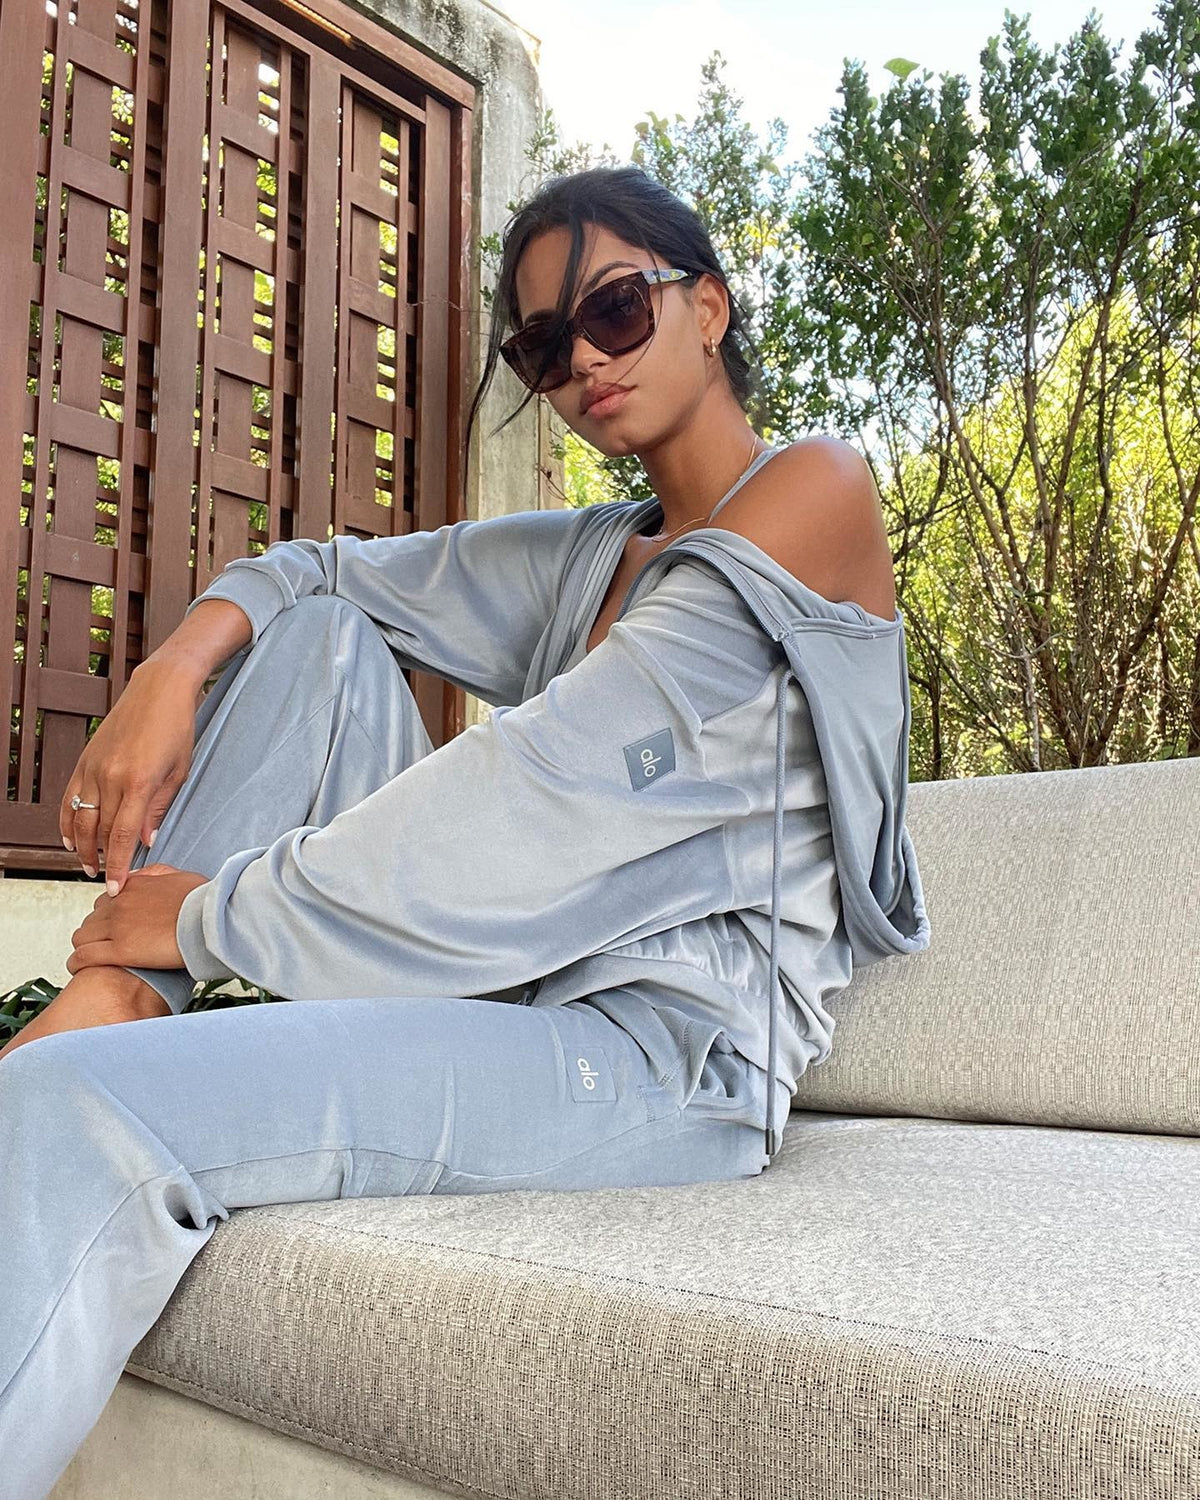 @daianesodre wearing the Velour Glimmer Full Zip Hoodie and Velour High-Waist Glimmer Wide Leg Pant in Steel Blue while seated on a couch posing for the camera.  